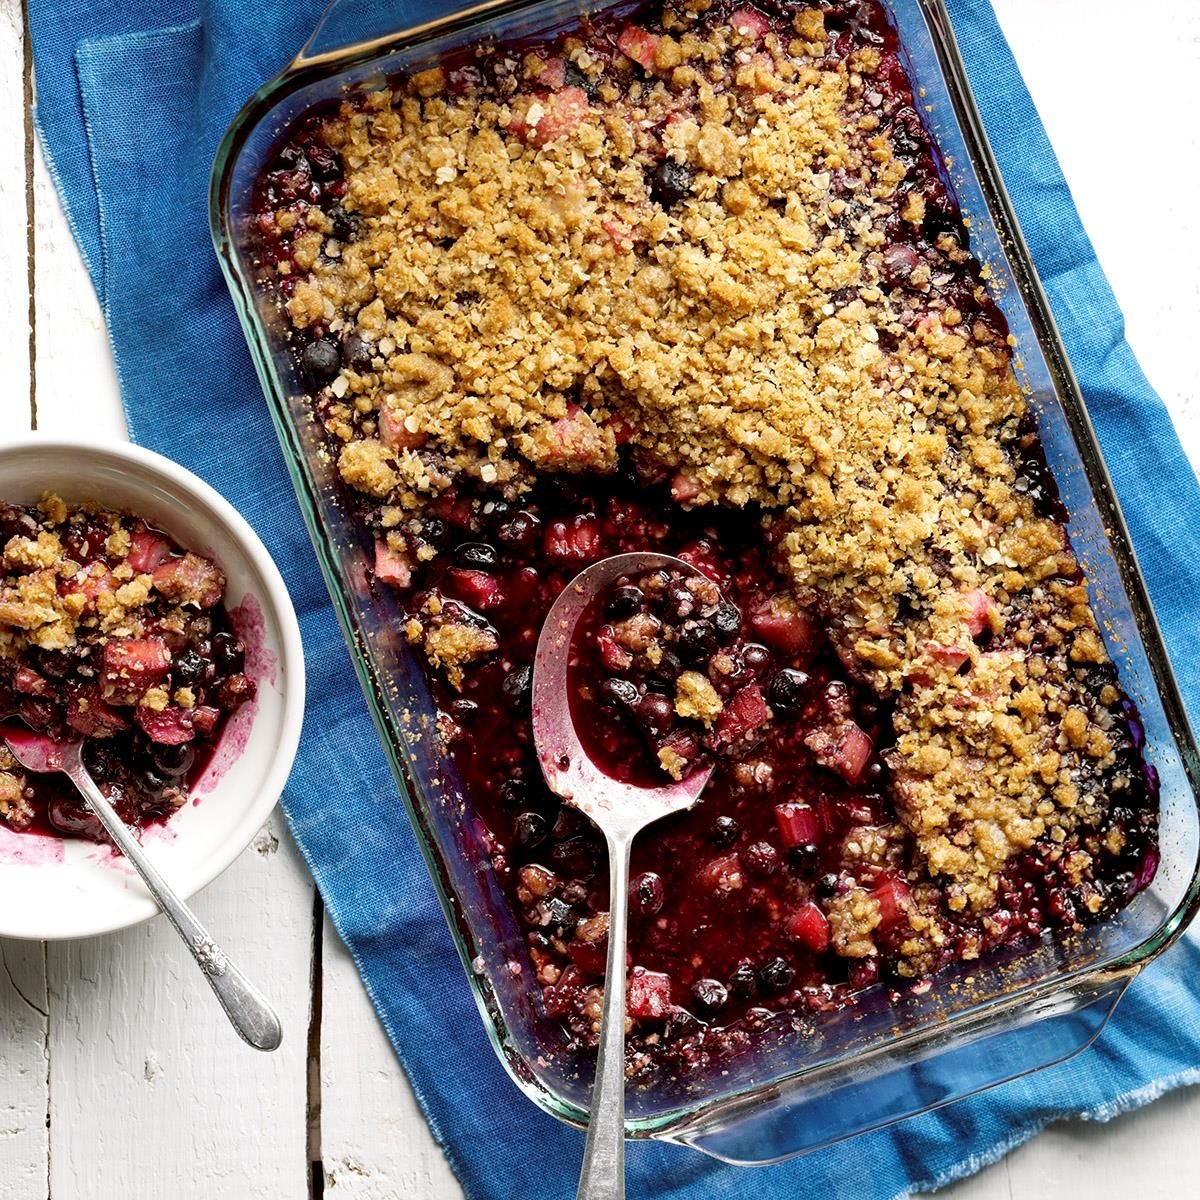 Day 15: Blueberry-Rhubarb Crumble